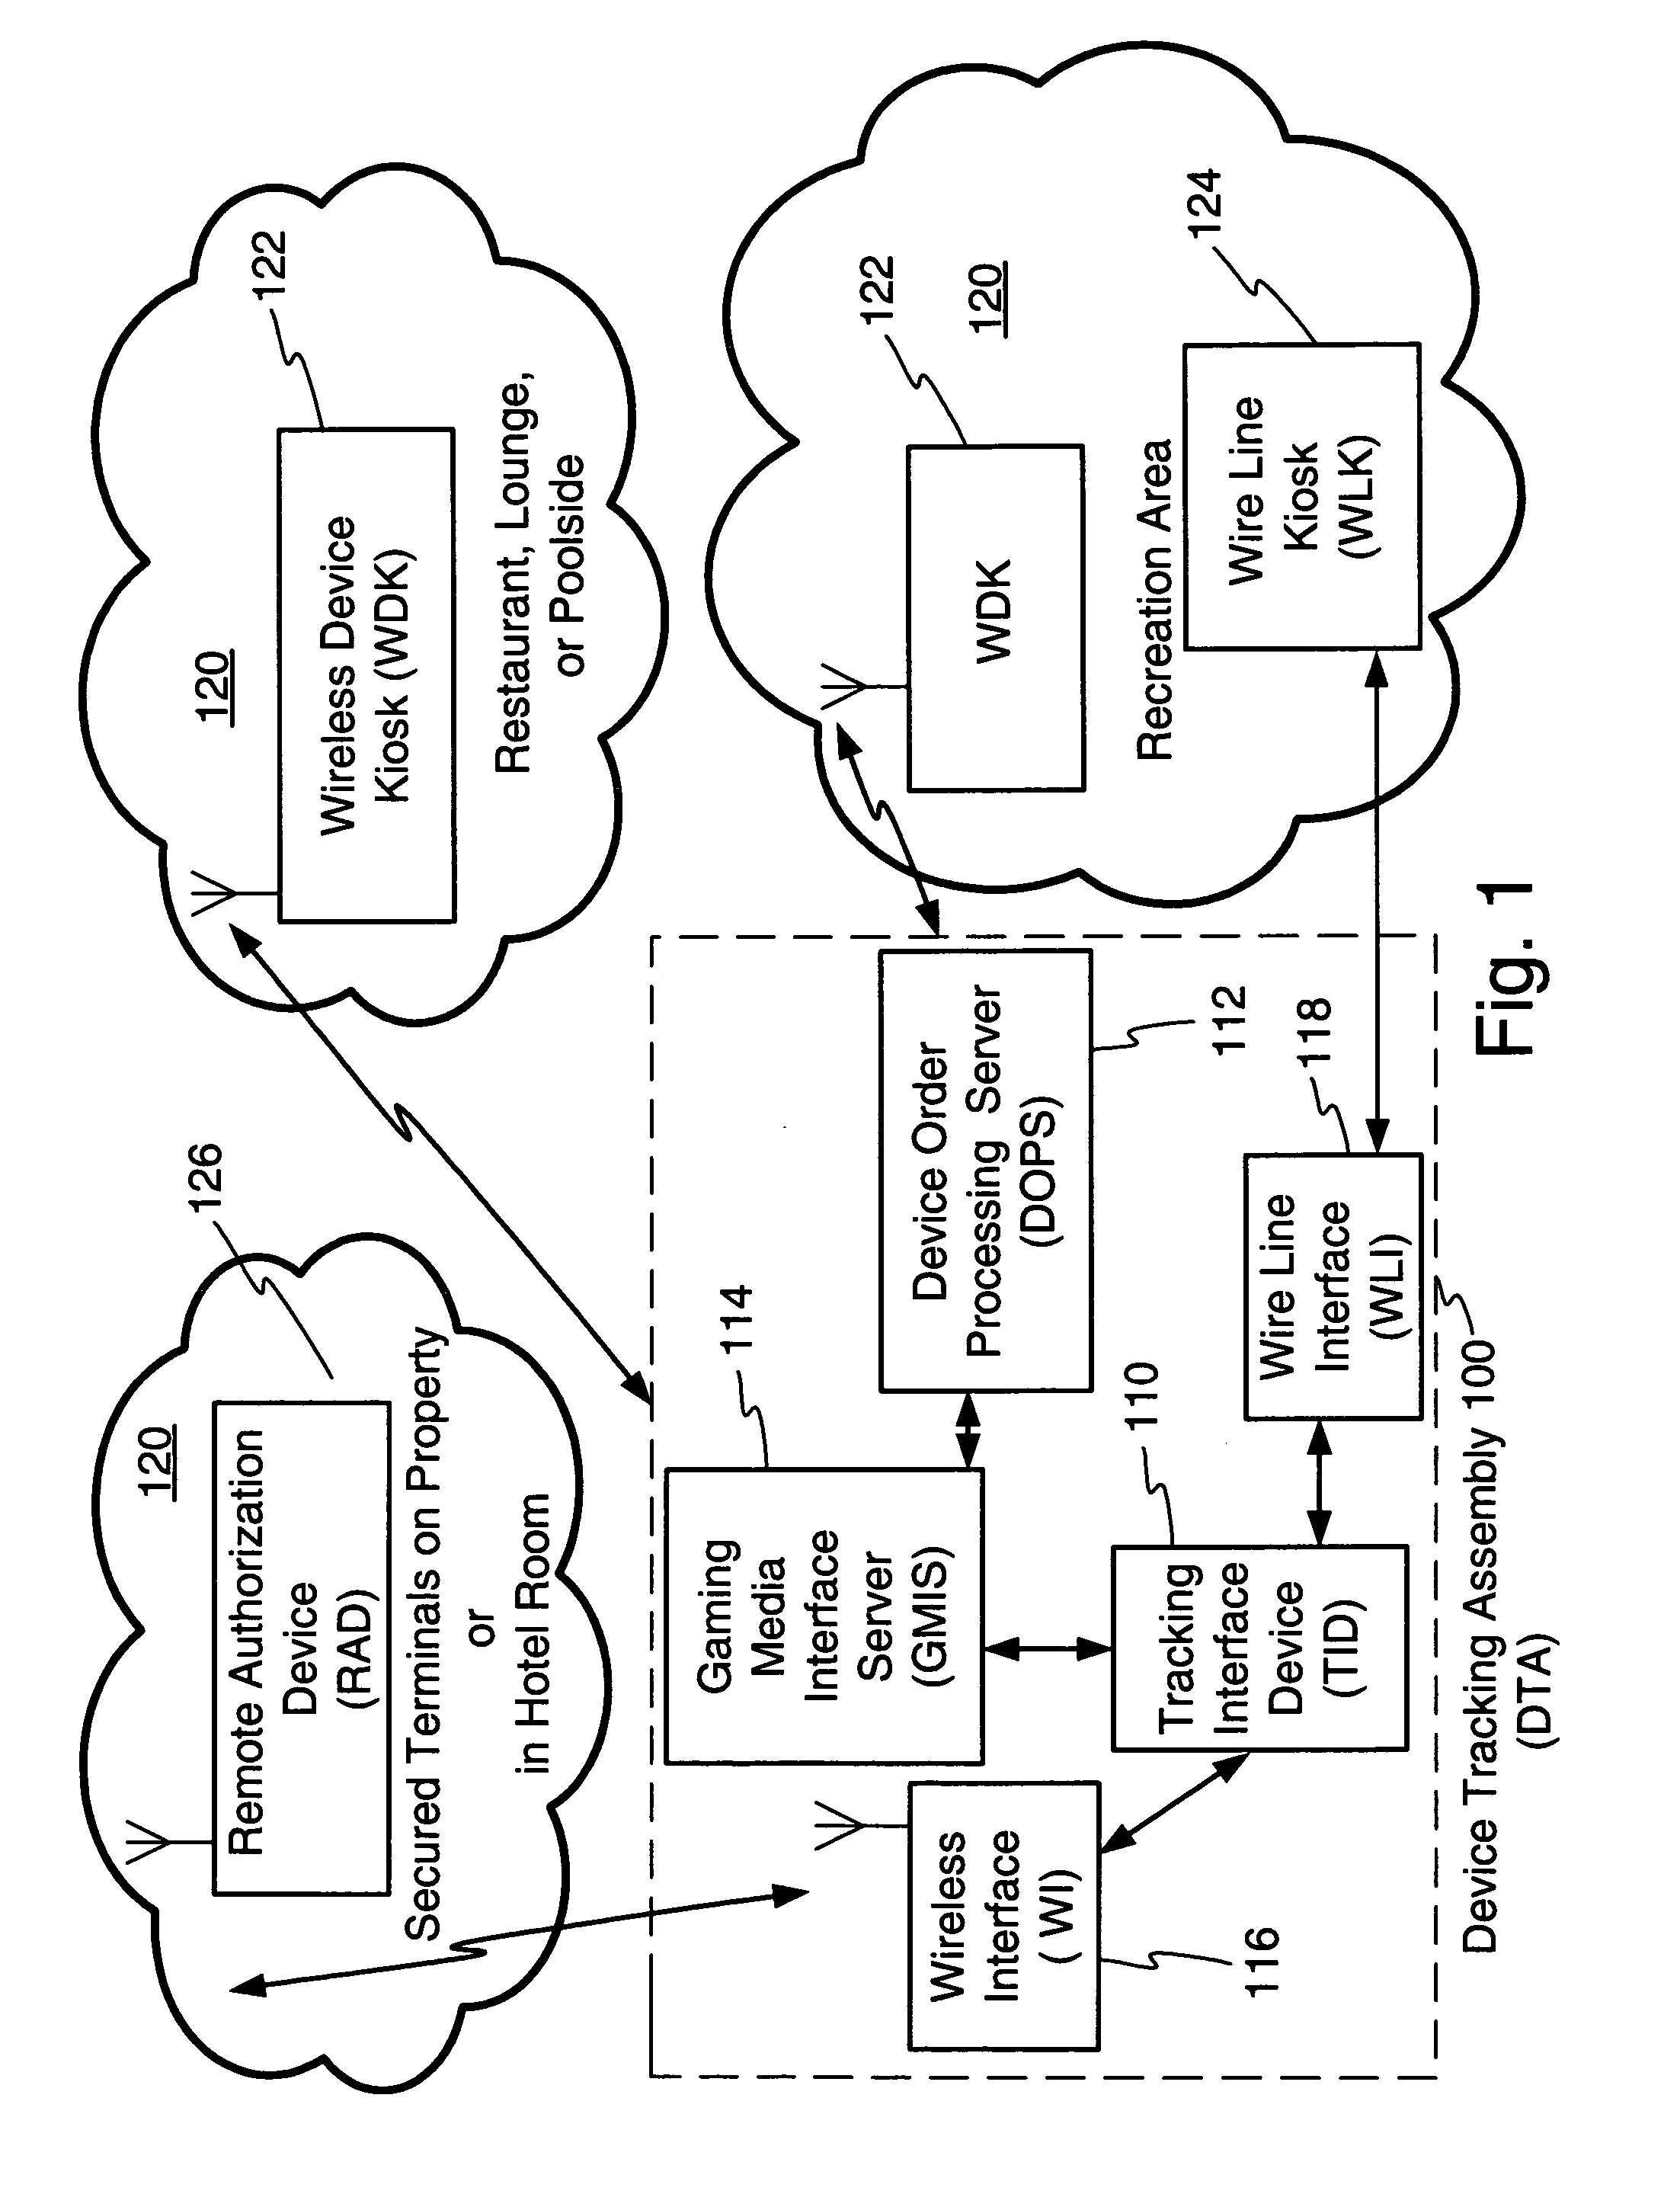 Method and apparatus for peer-to-peer wagering game